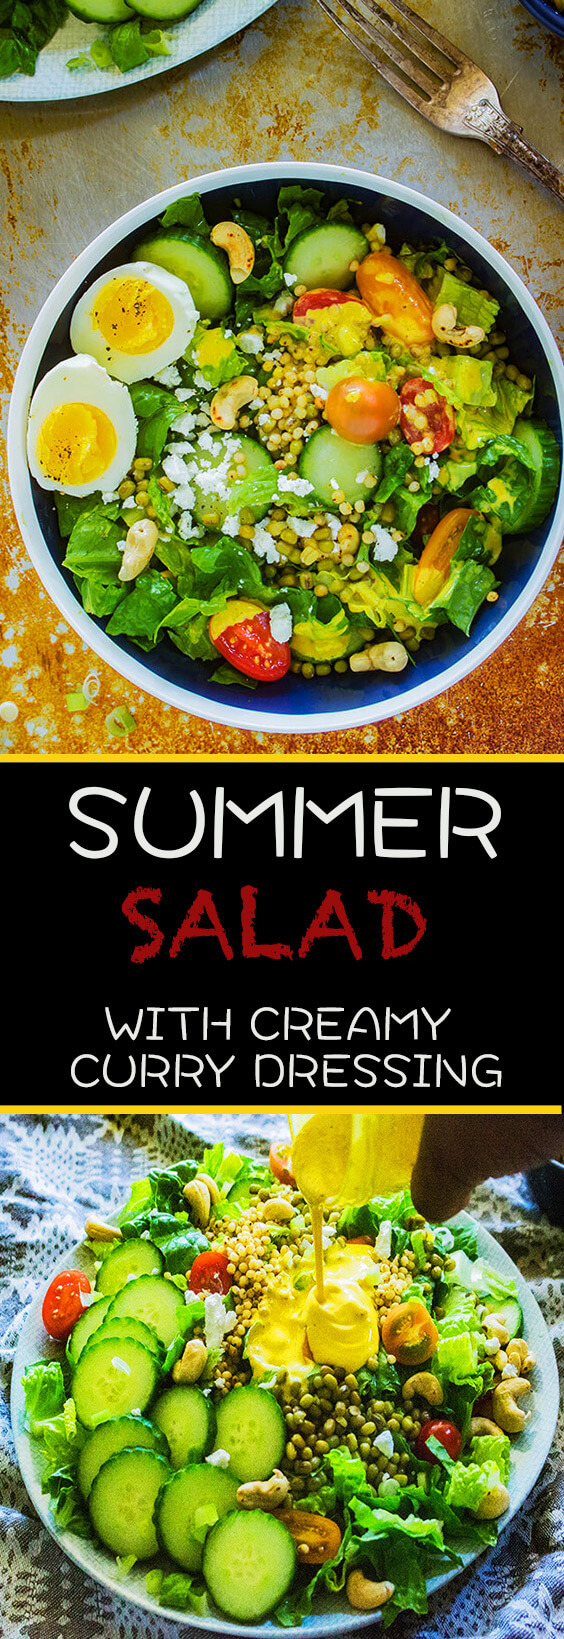 This Summer Harvest Sorghum Salad recipe has sweet ripe tomatoes, crisp lettuce creamy goat cheese & toasted cashews covered in creamy curry dressing.